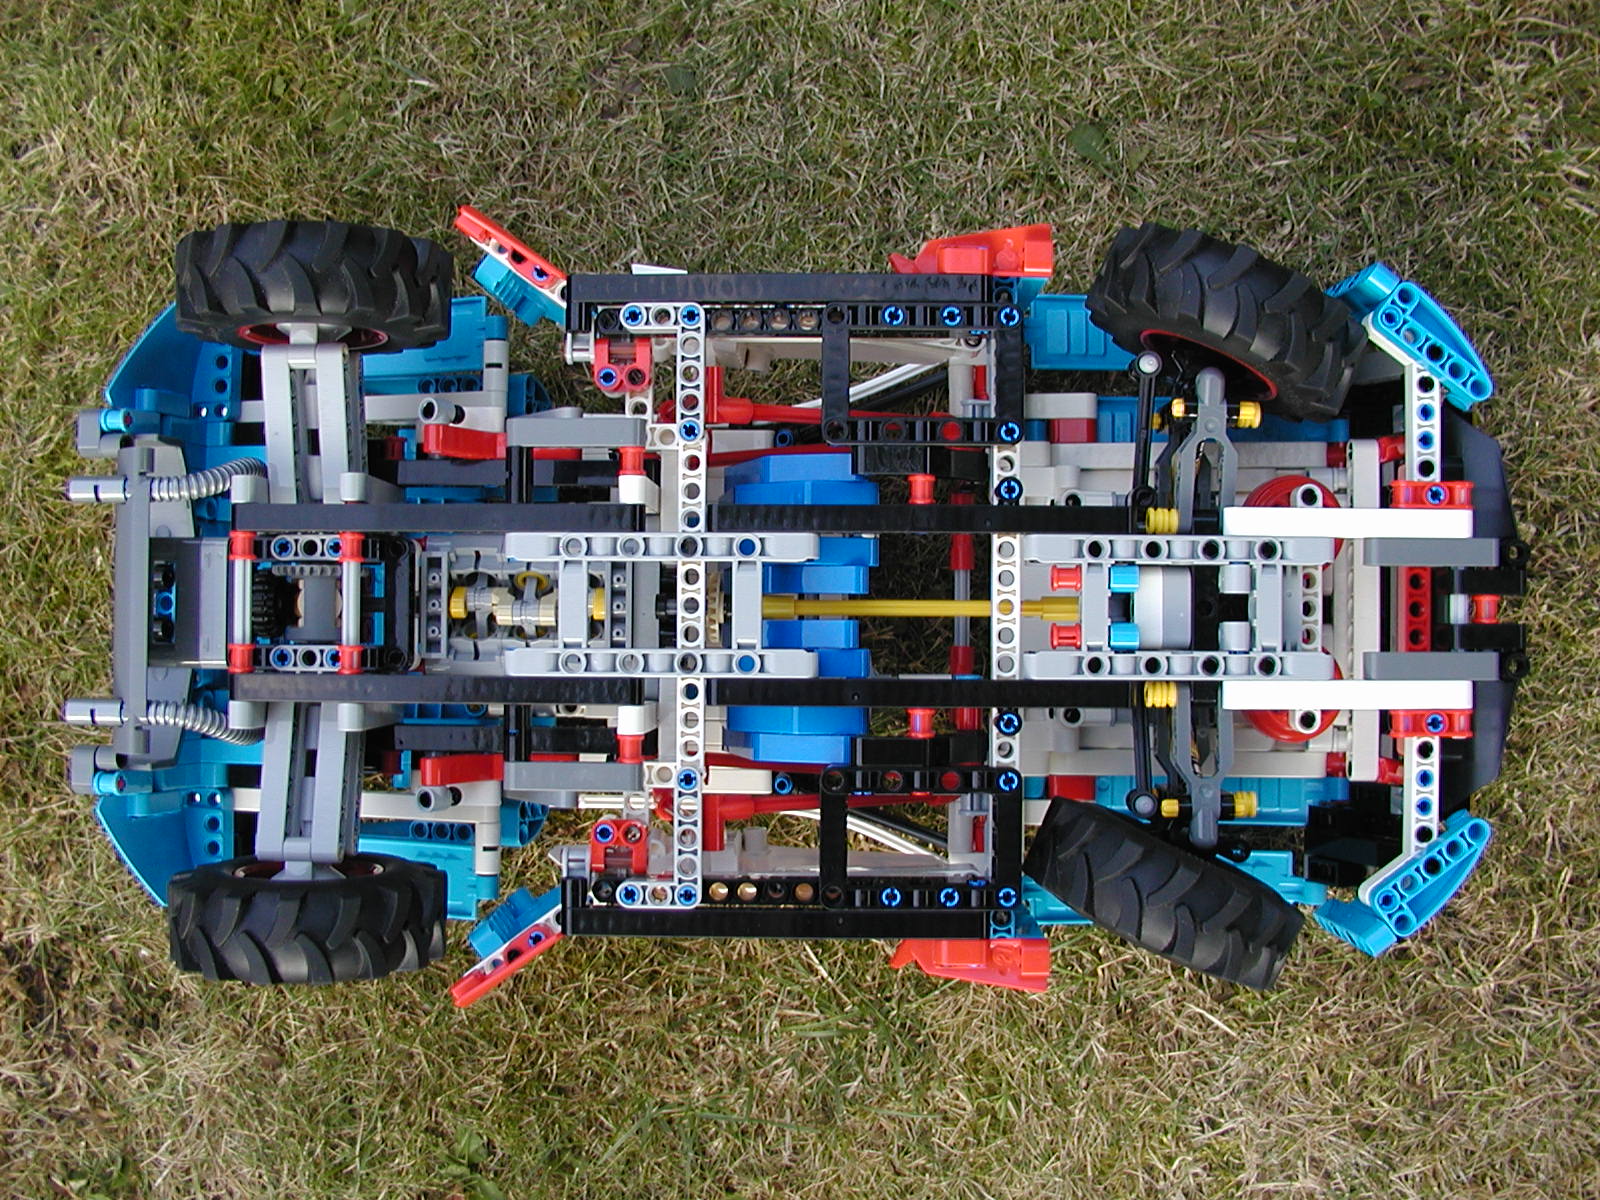 42077 - Rally Car - MODs and Improvements - Page 3 - LEGO Technic 